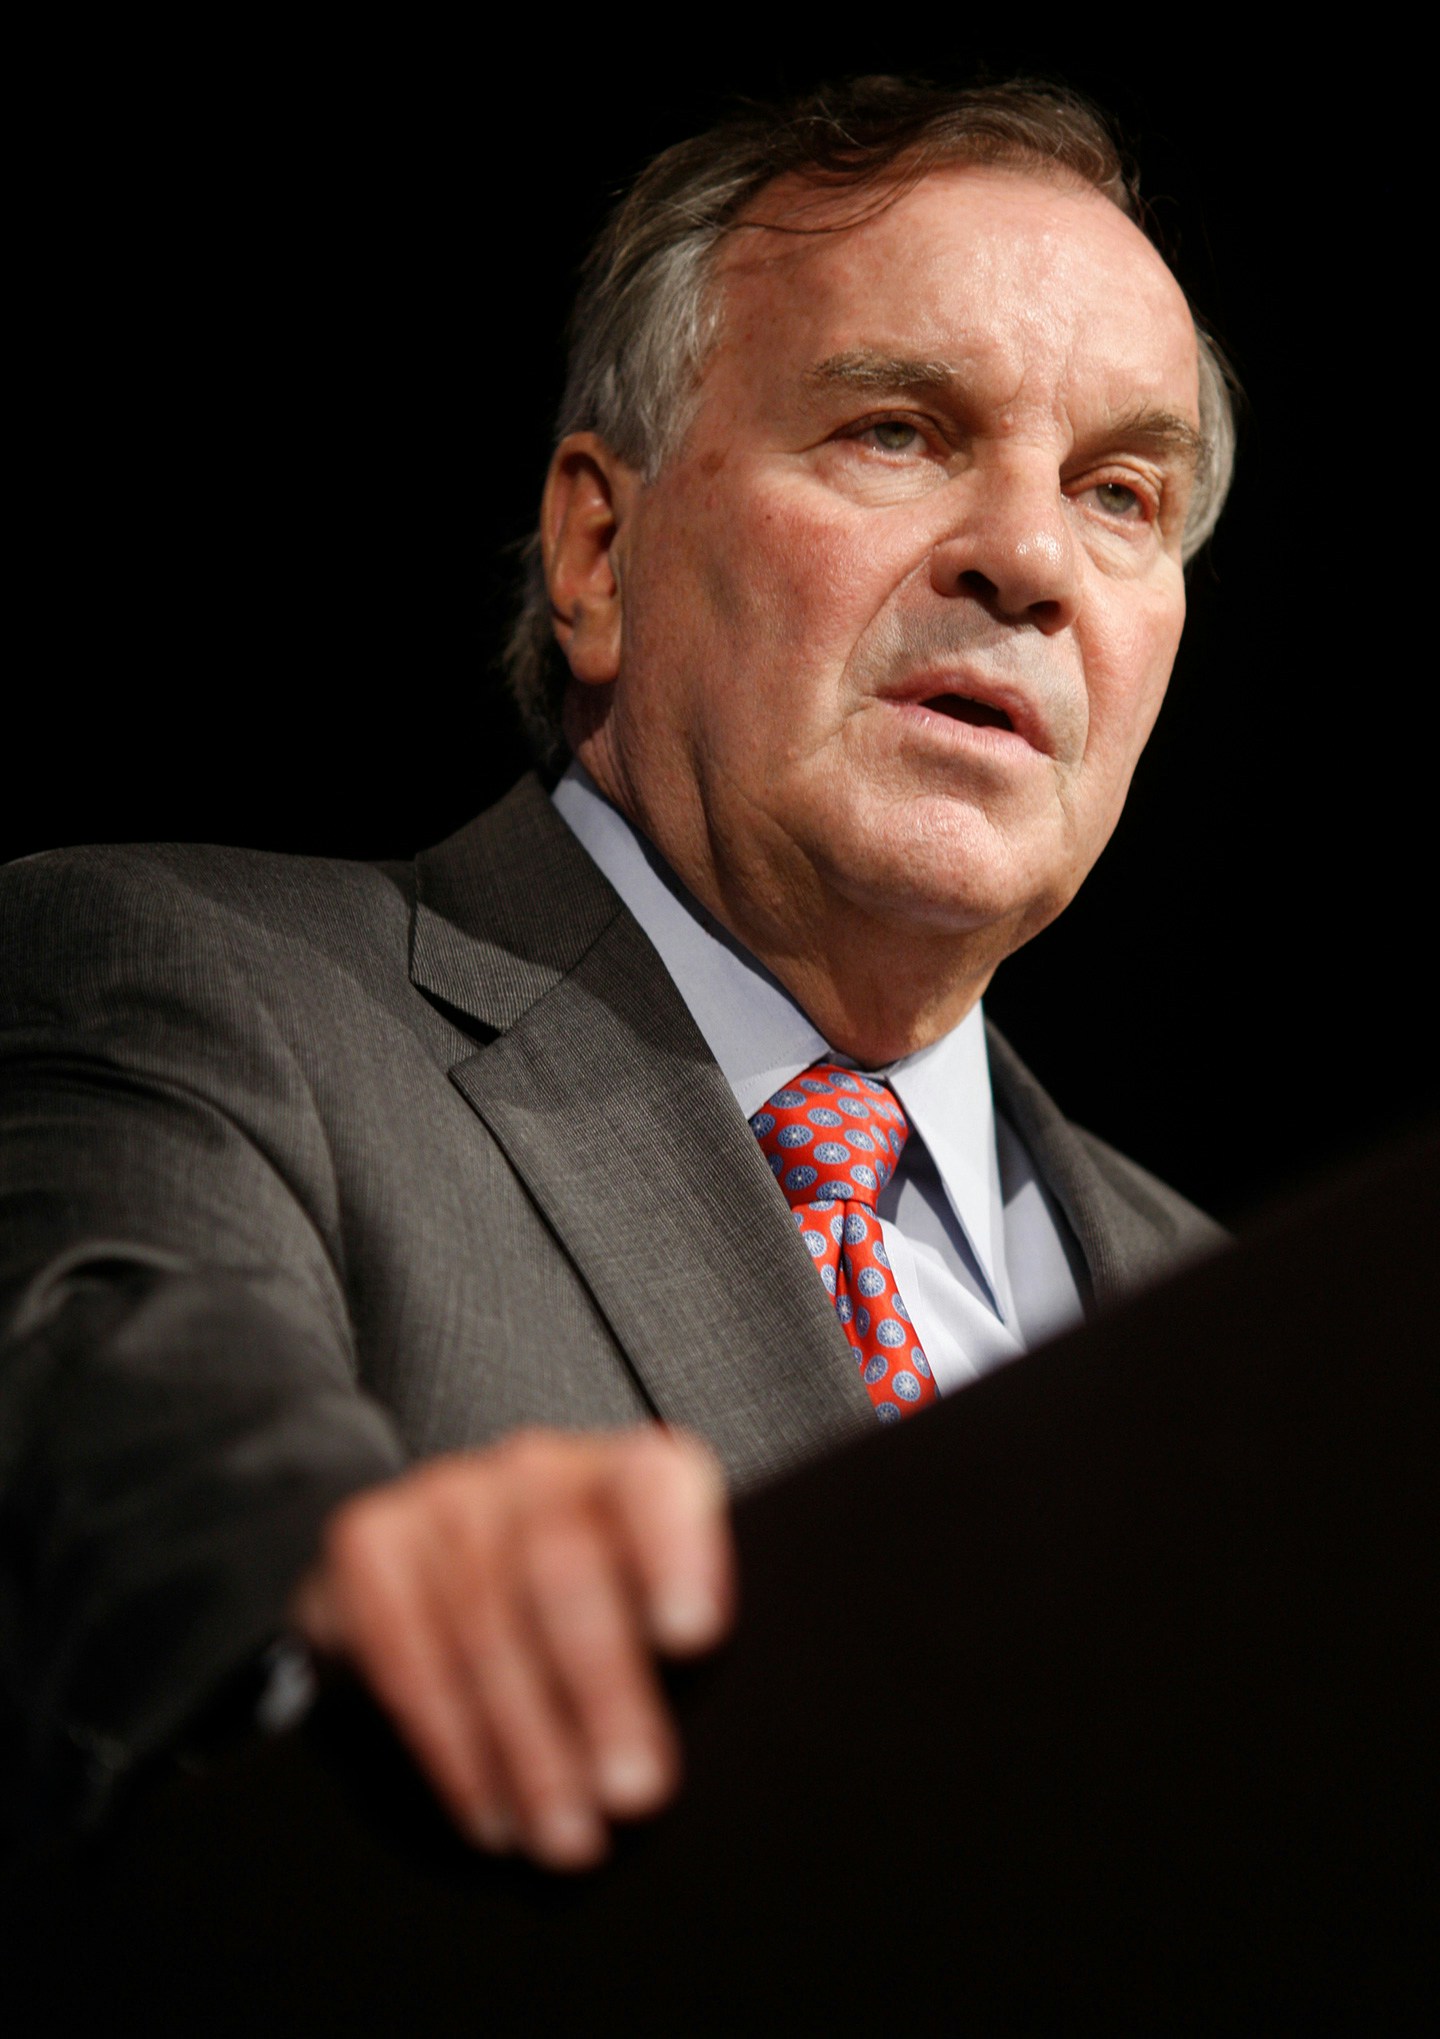 Chicago Mayor Richard Daley addresses the National Fraternal Congress on September 9, 2010 in Chicago, Illinois. Daley announced September 8, that he would not seek reelection as mayor, a post he has held since 1989.